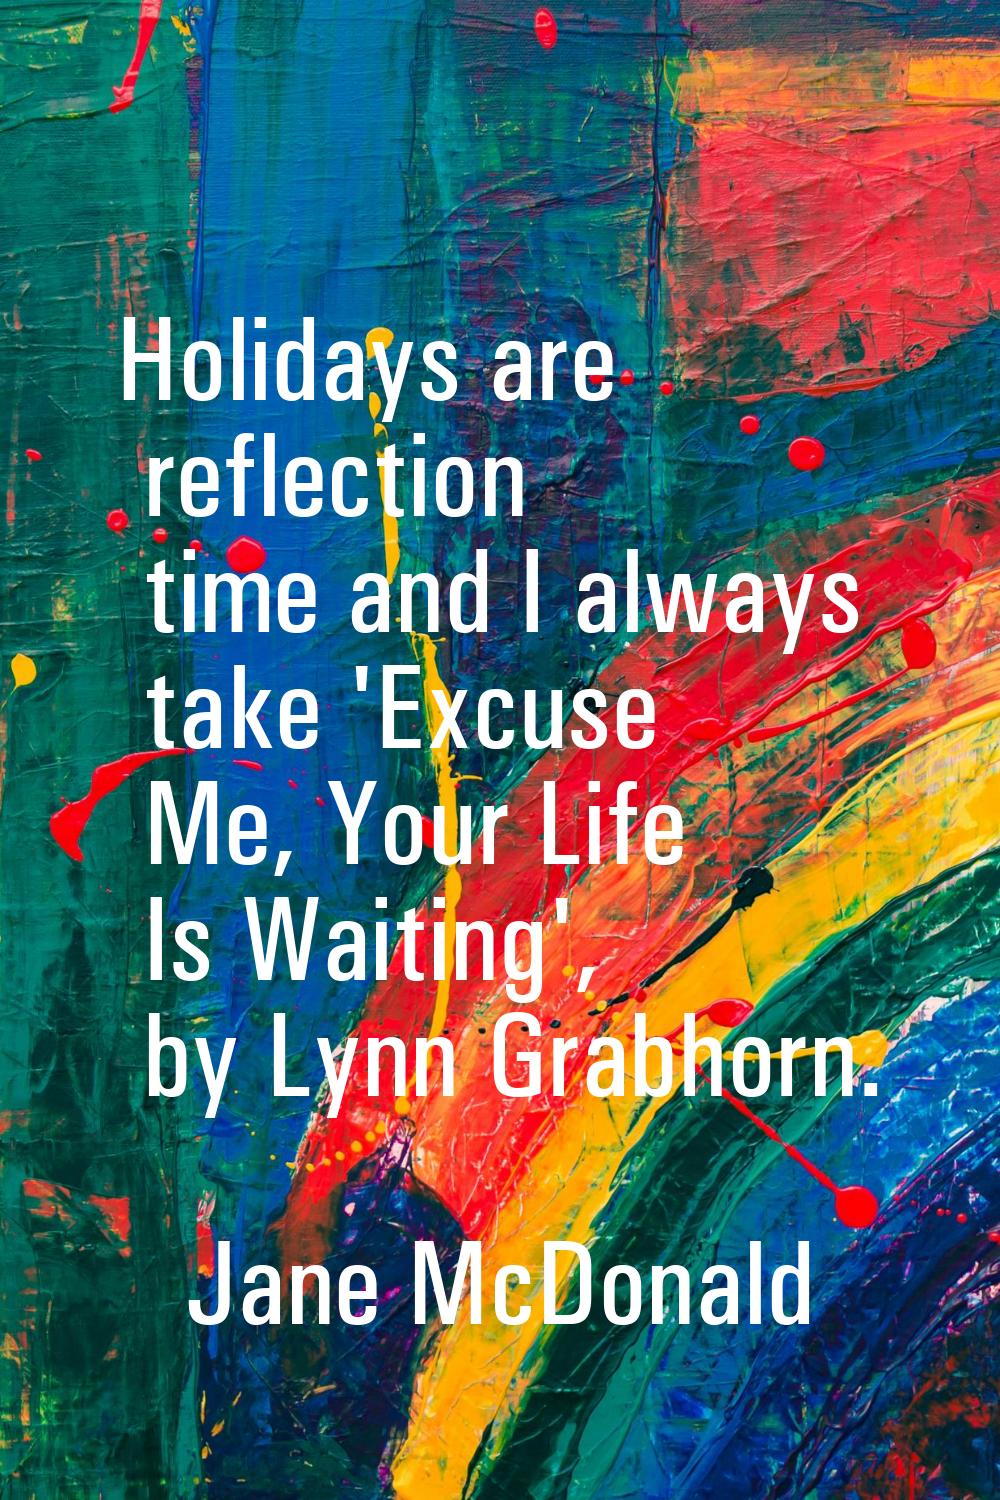 Holidays are reflection time and I always take 'Excuse Me, Your Life Is Waiting', by Lynn Grabhorn.